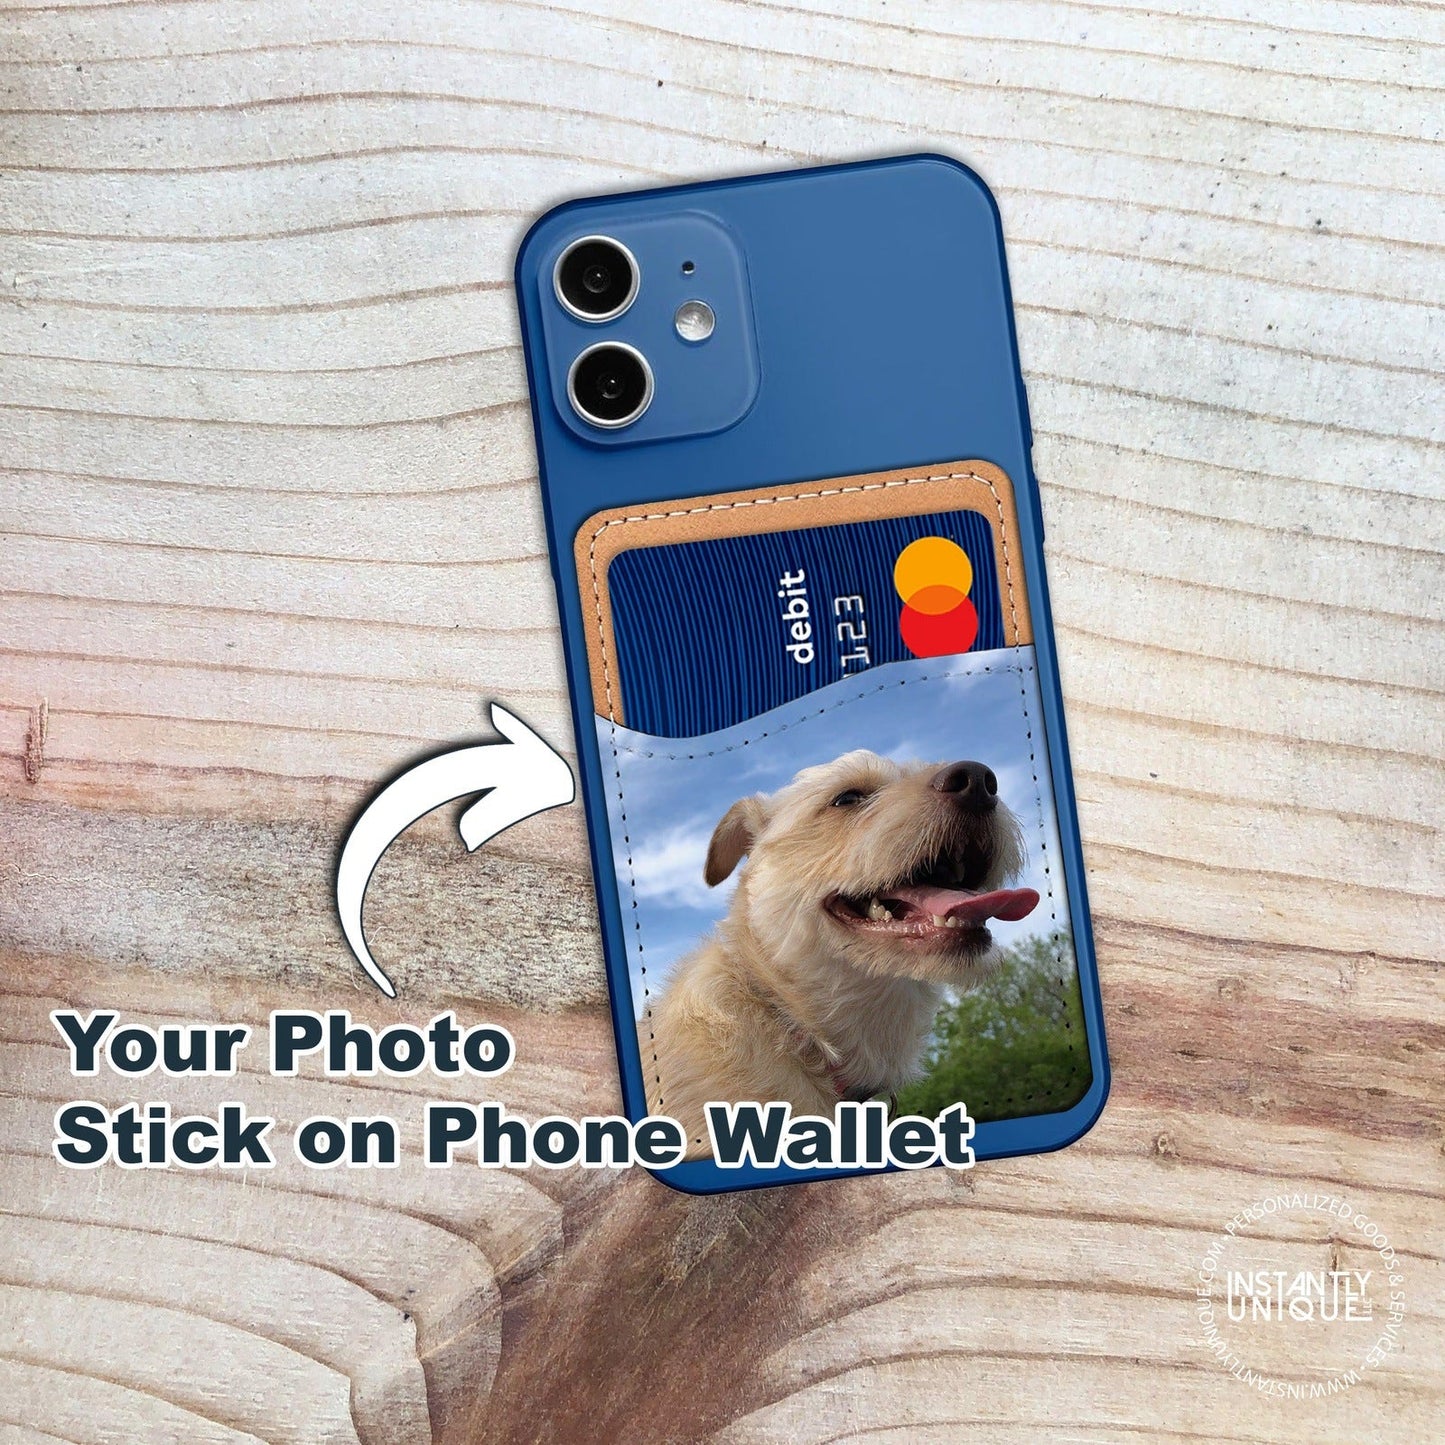 Custom Stick On Phone Wallet Card Holder with Picture - Add Your Photo